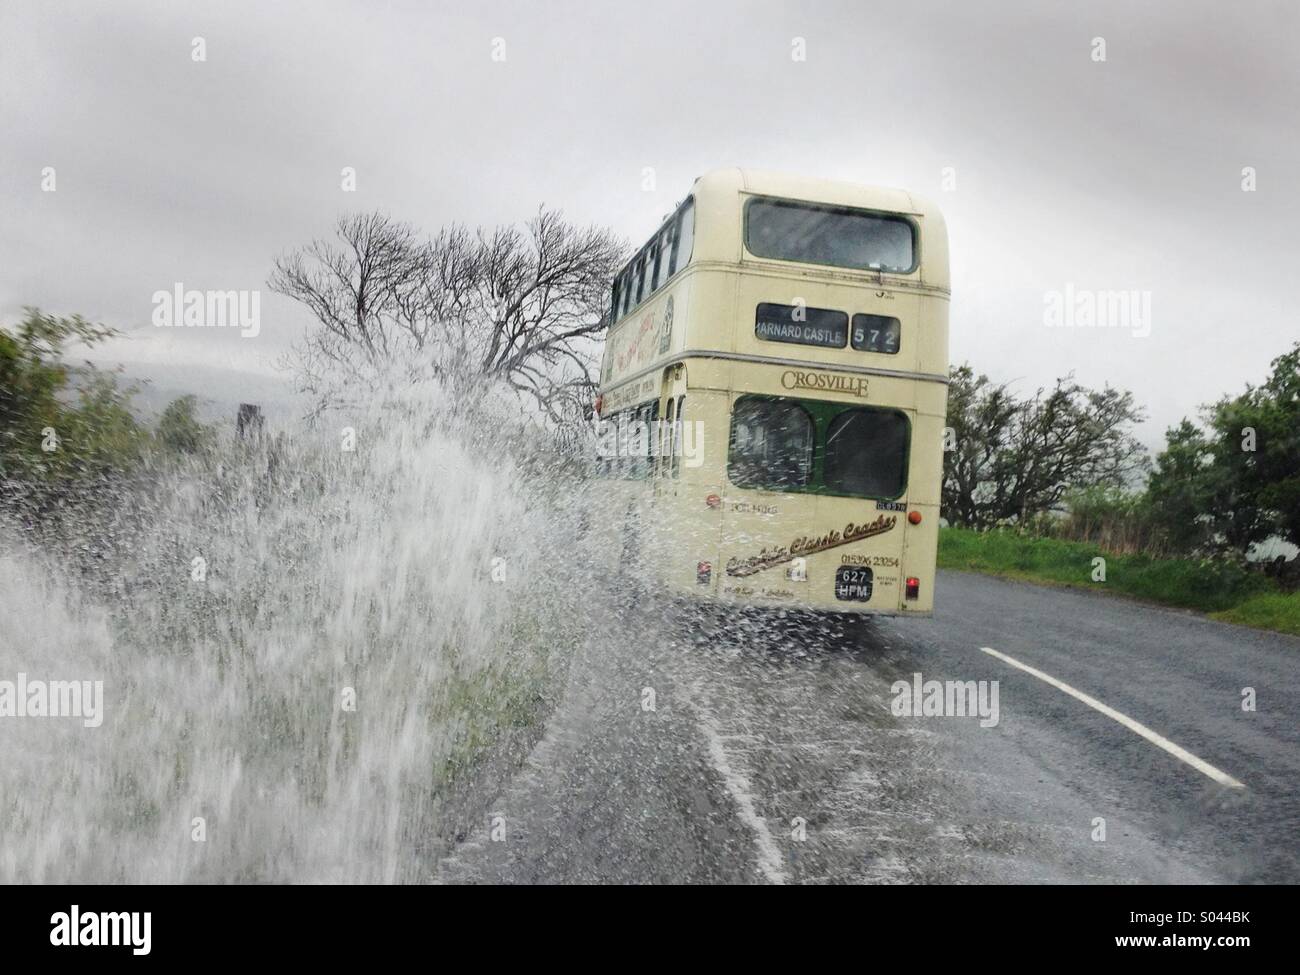 Heavy rains create difficult driving conditions for this Classic 1959 Leyland Lodekka Bus as it travels on the Brough to Middleton-in-Teesdale Road in the Pennines Hills, Co Durham, England Stock Photo